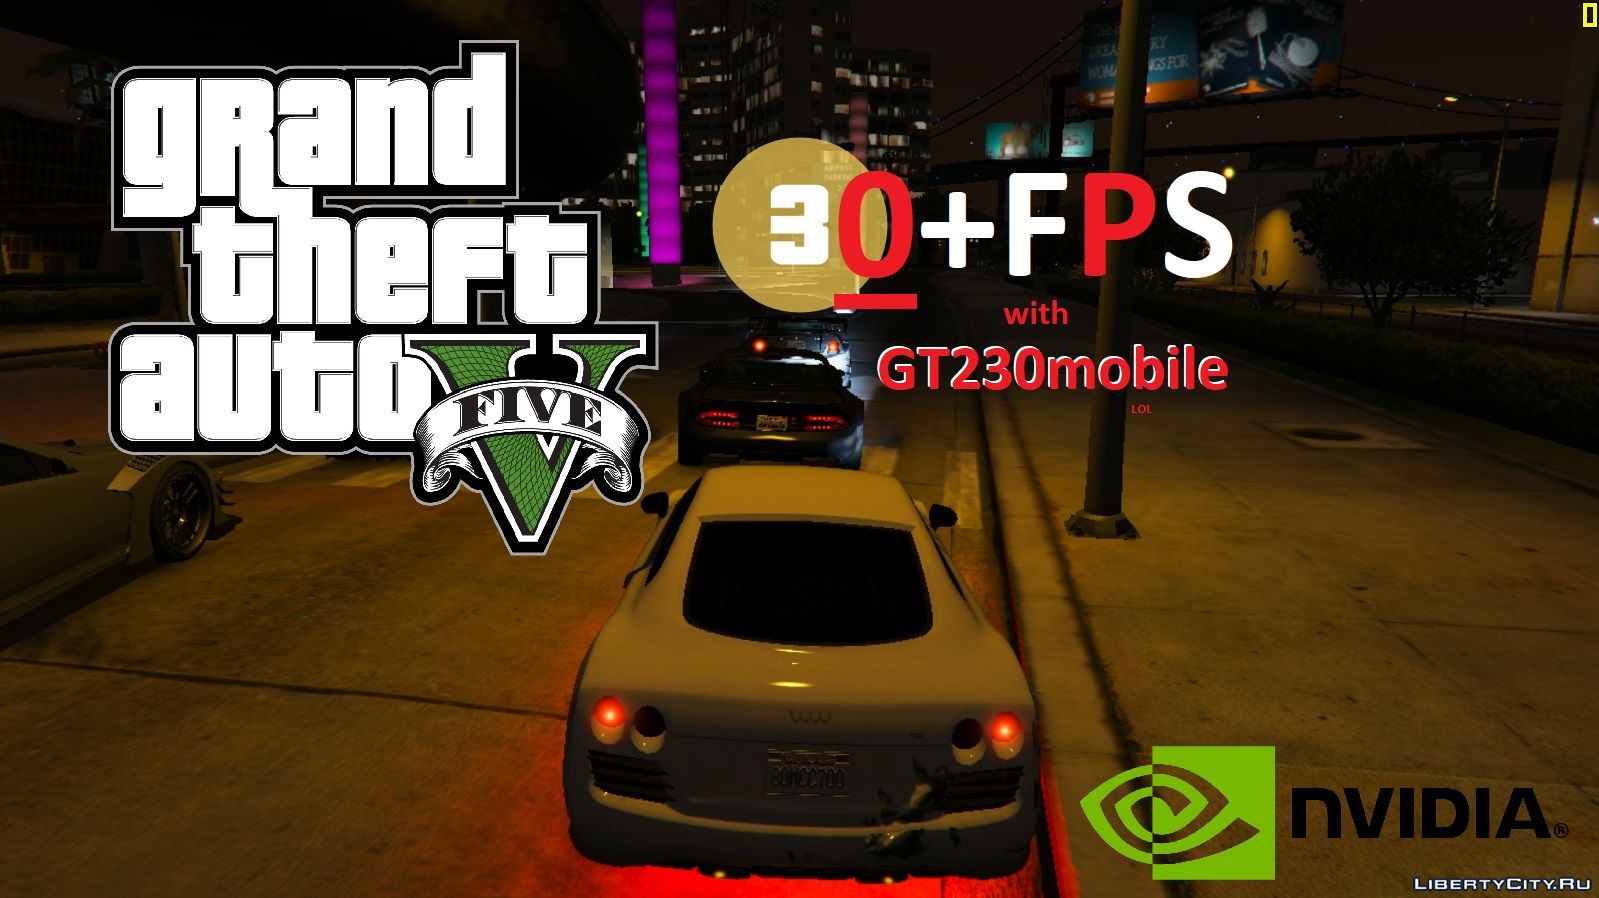 Files to replace Common.cfg in GTA 5 (24 files) / Files have been